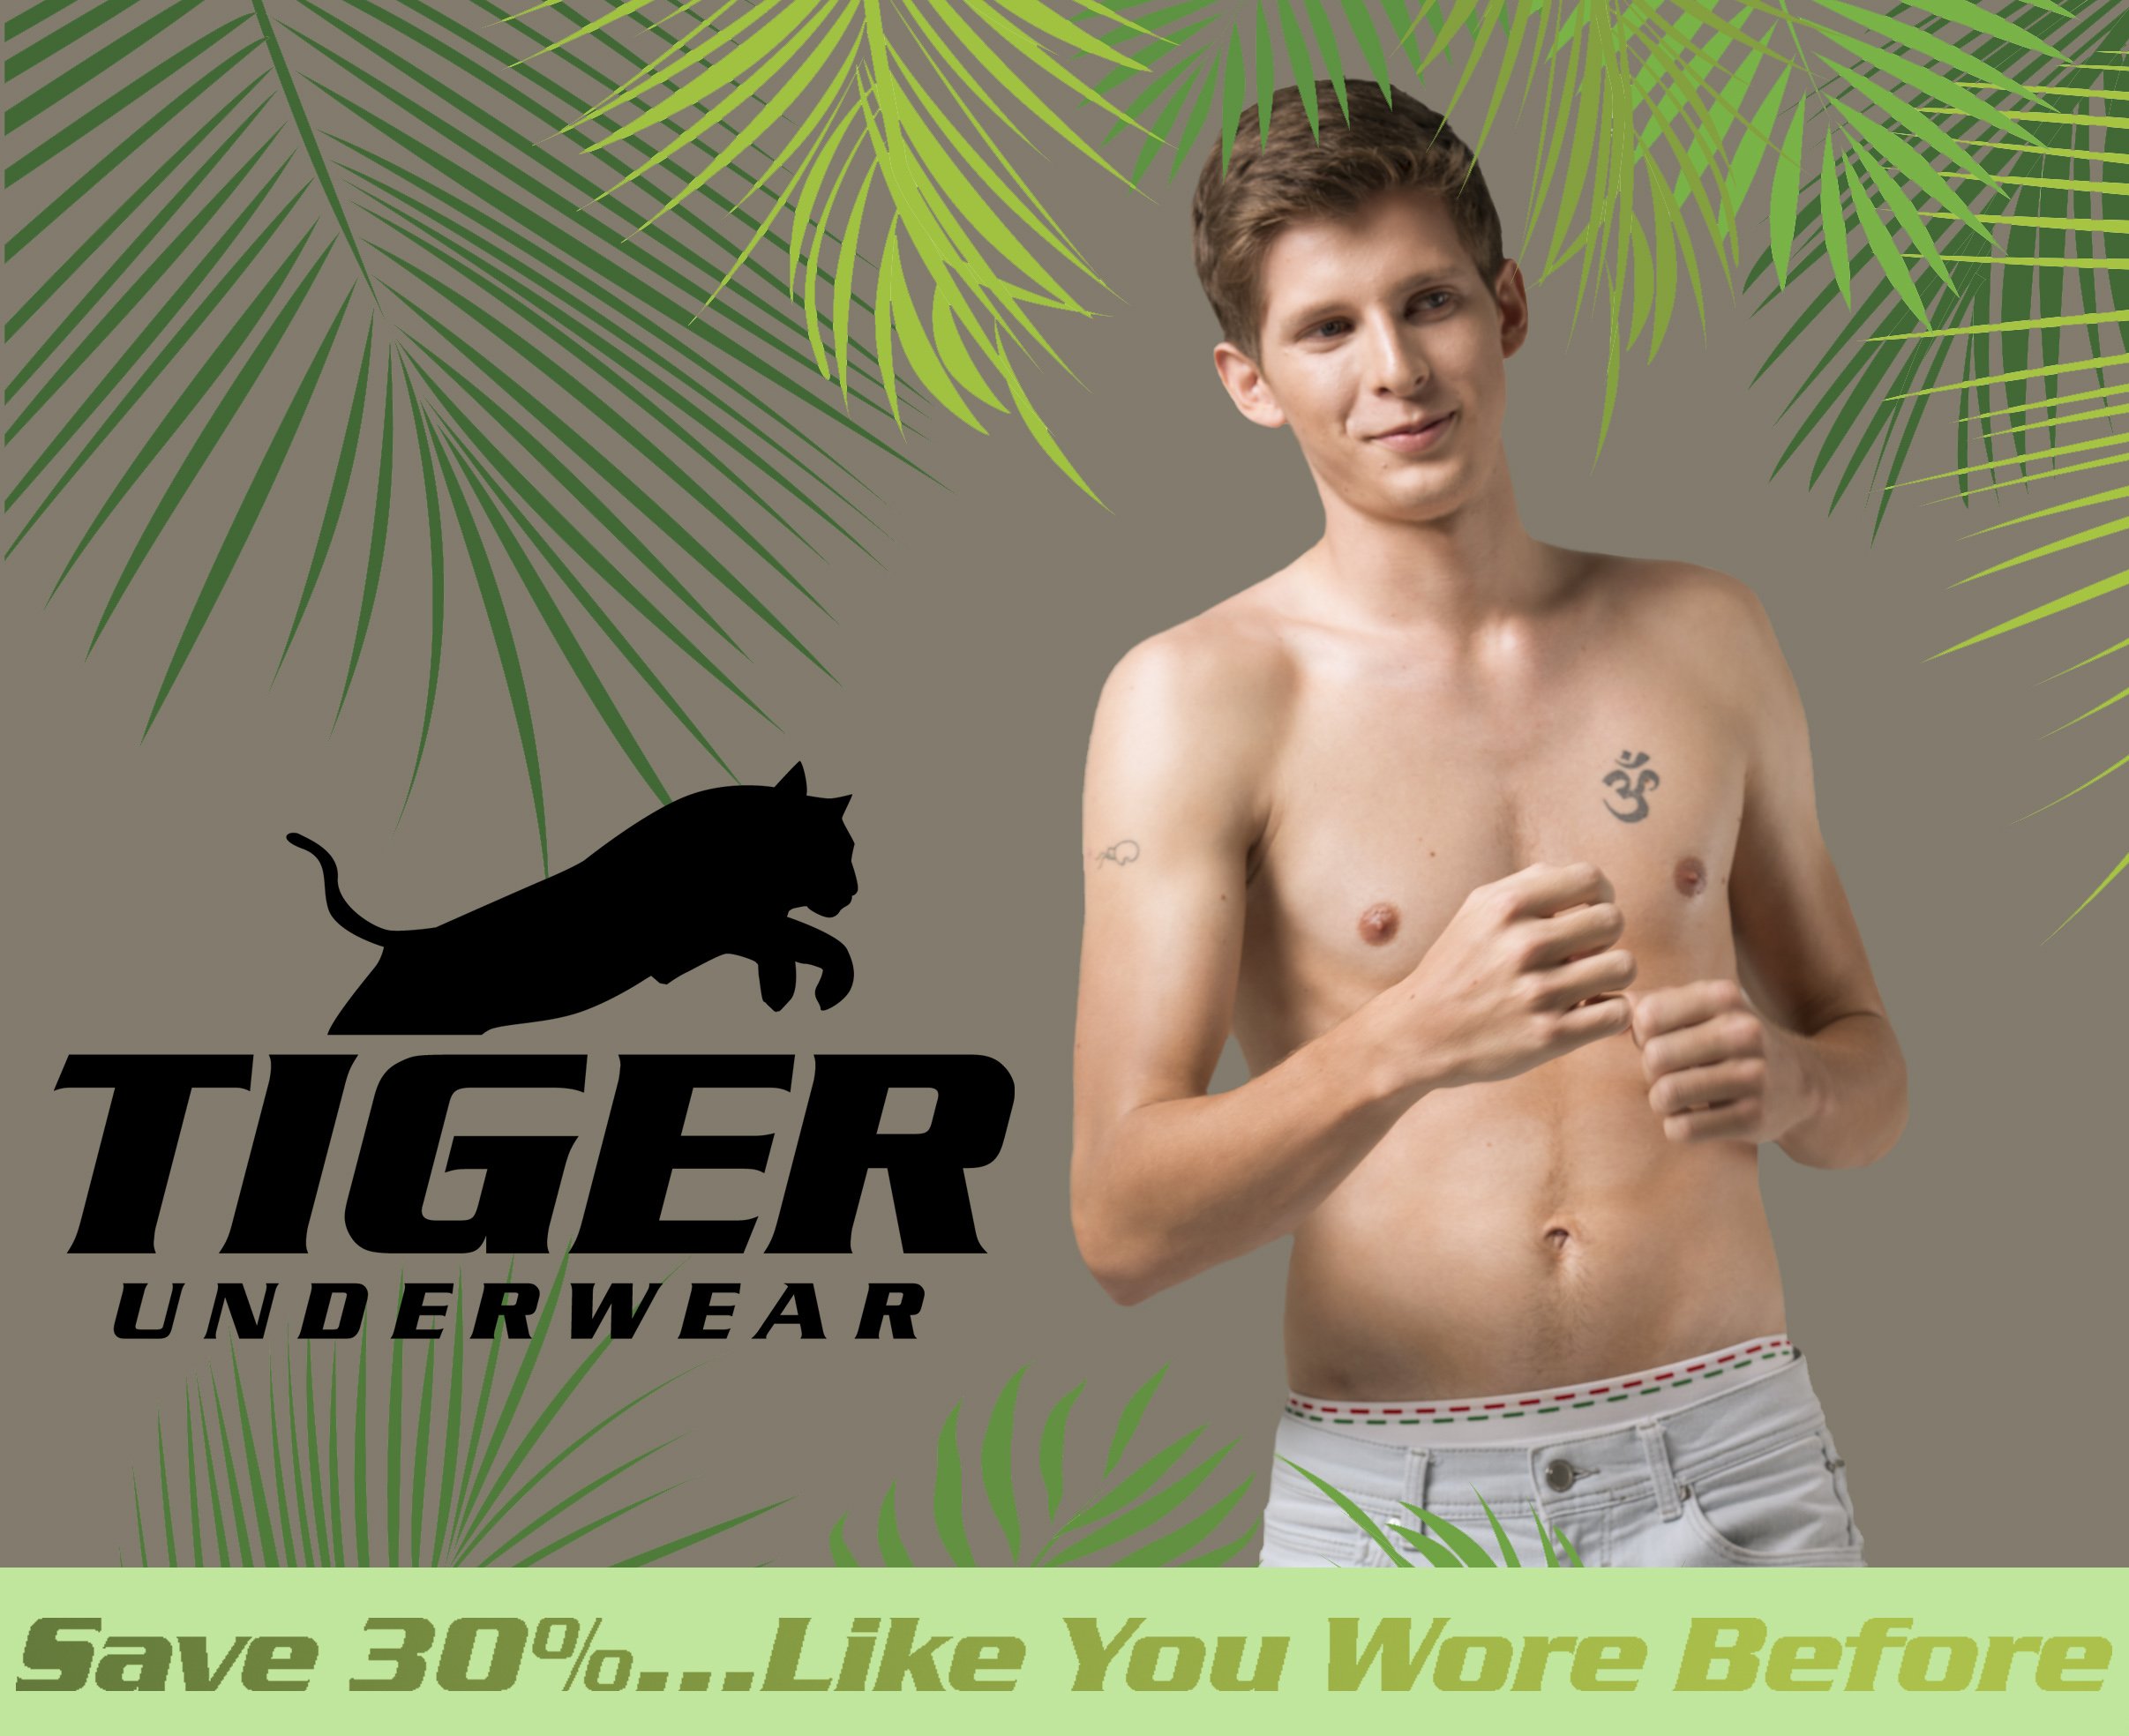 boys in tiger underwear, boys in tiger underwear Suppliers and  Manufacturers at